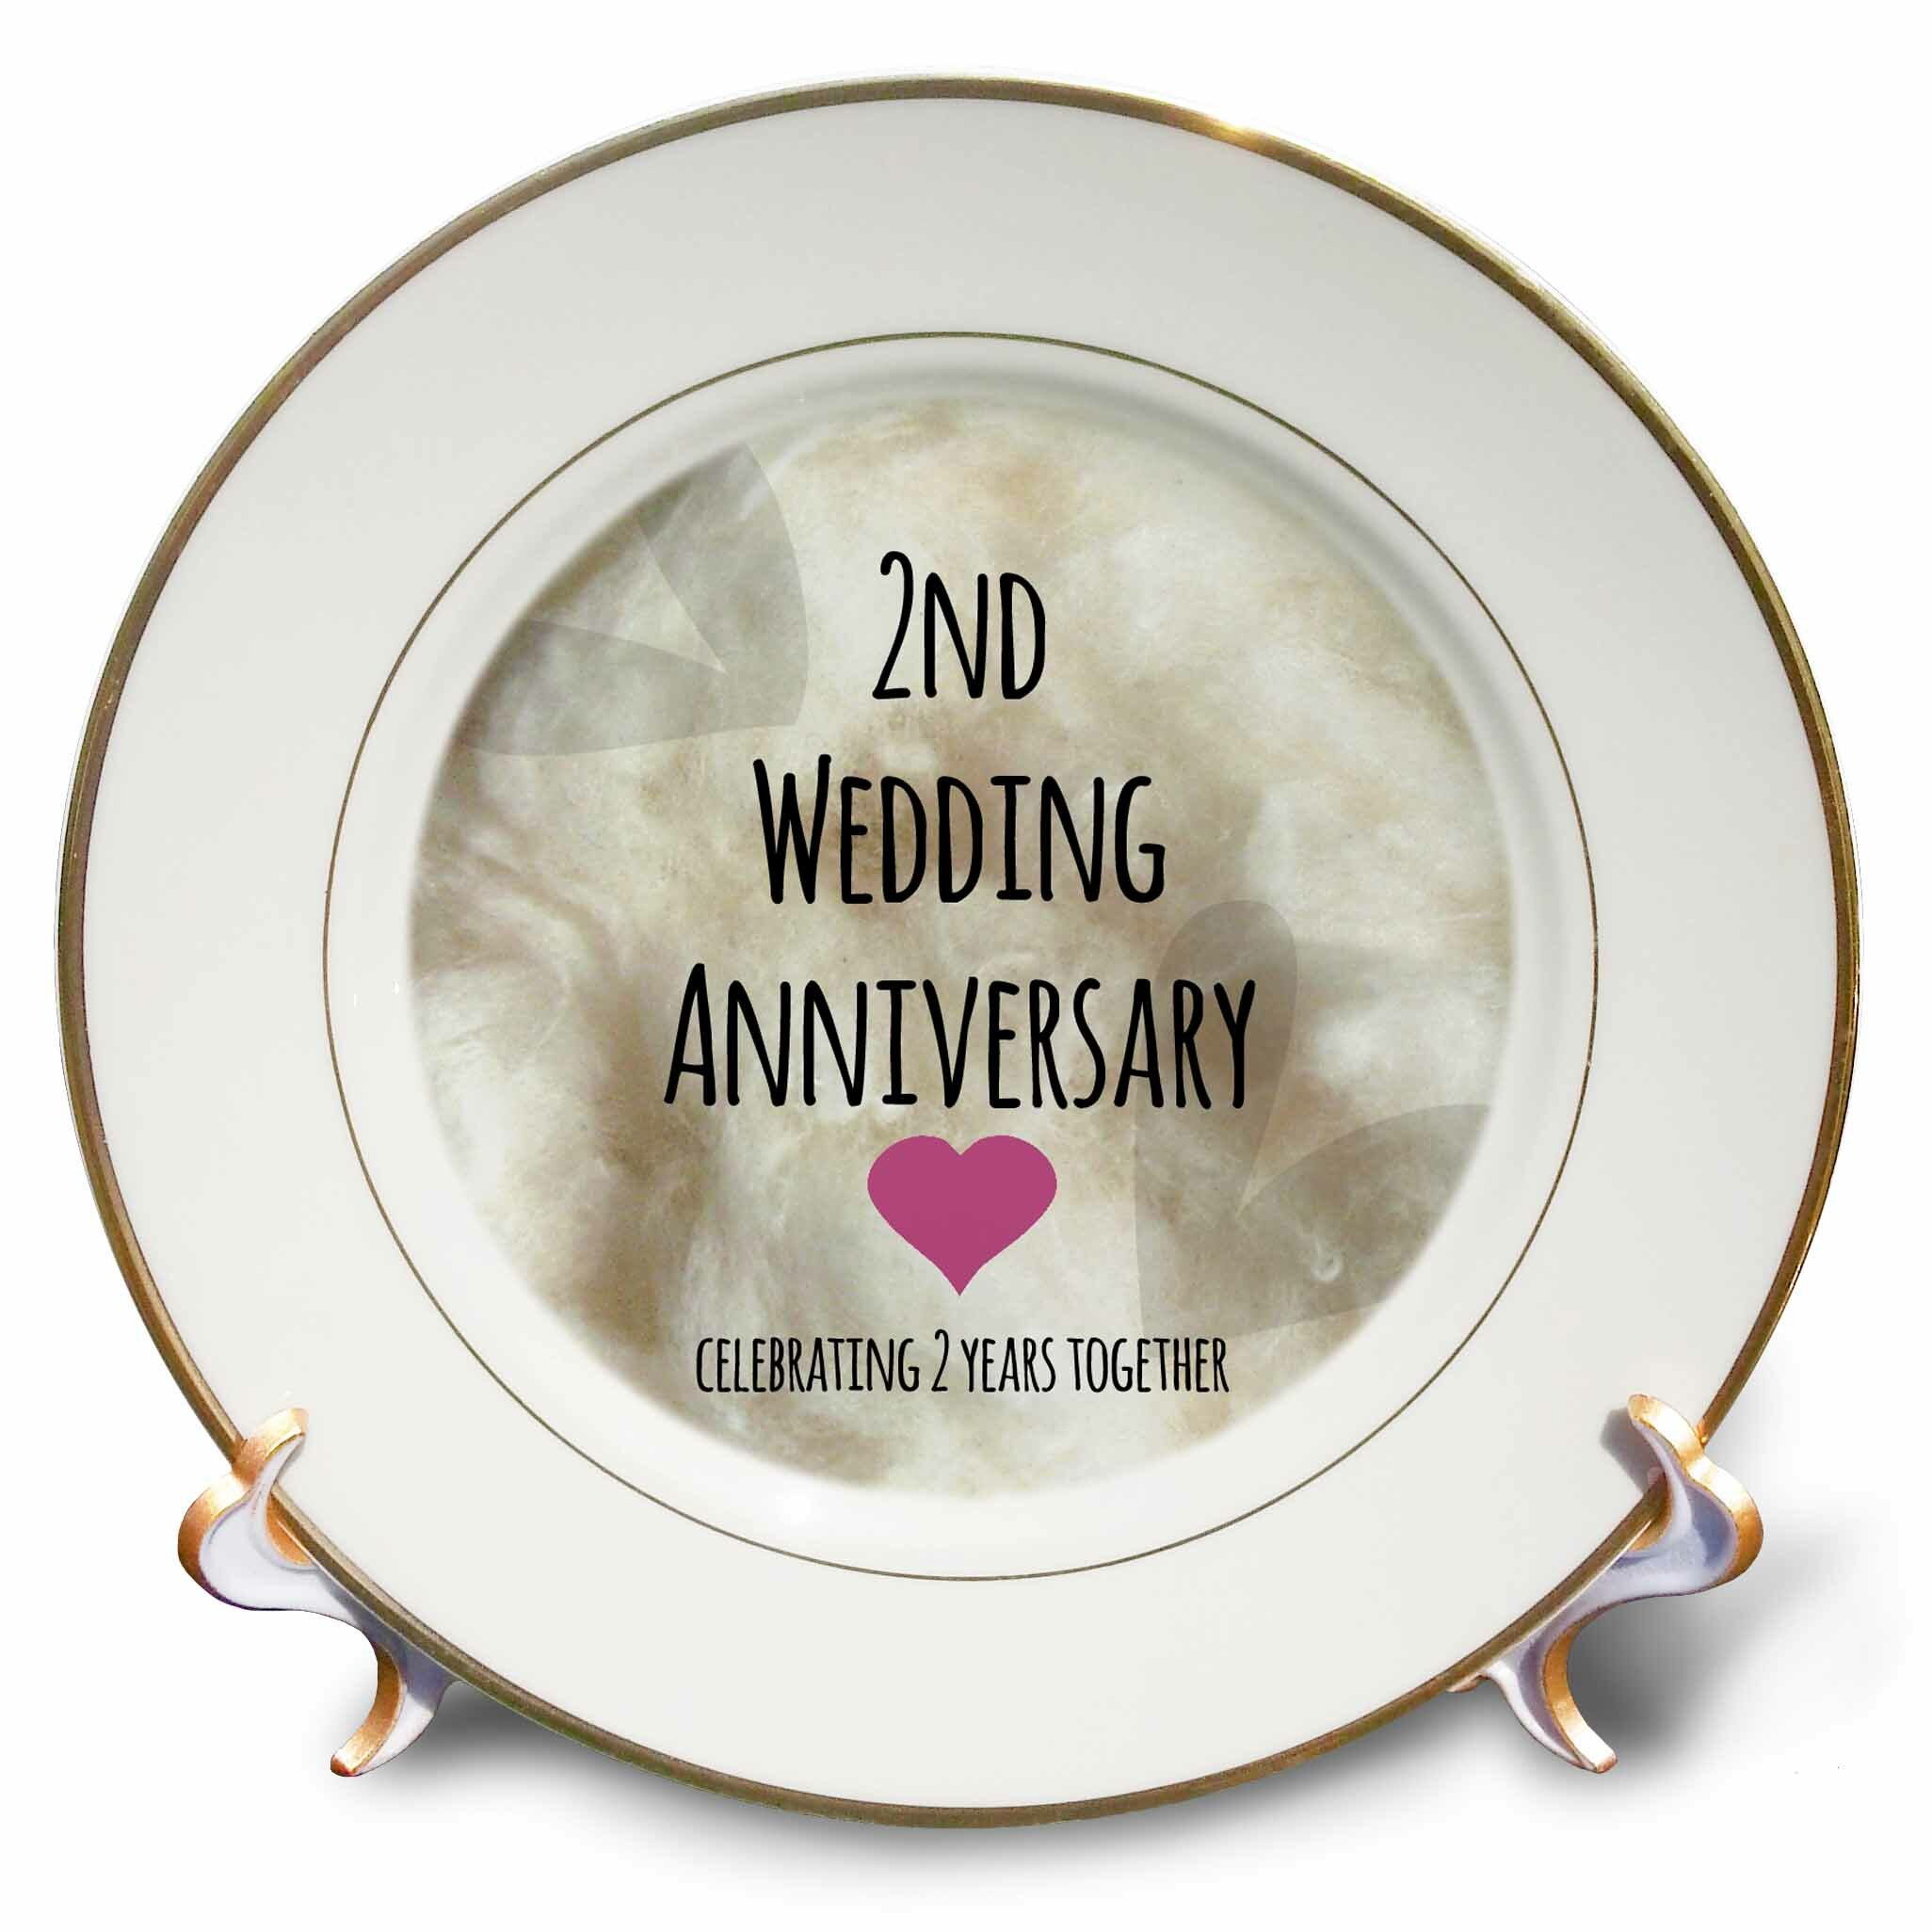 East Urban Home 2nd Wedding Anniversary Gift Cotton Celebrating 2 Years Together Second Anniversaries Porcelain Decorative Plate Wayfair